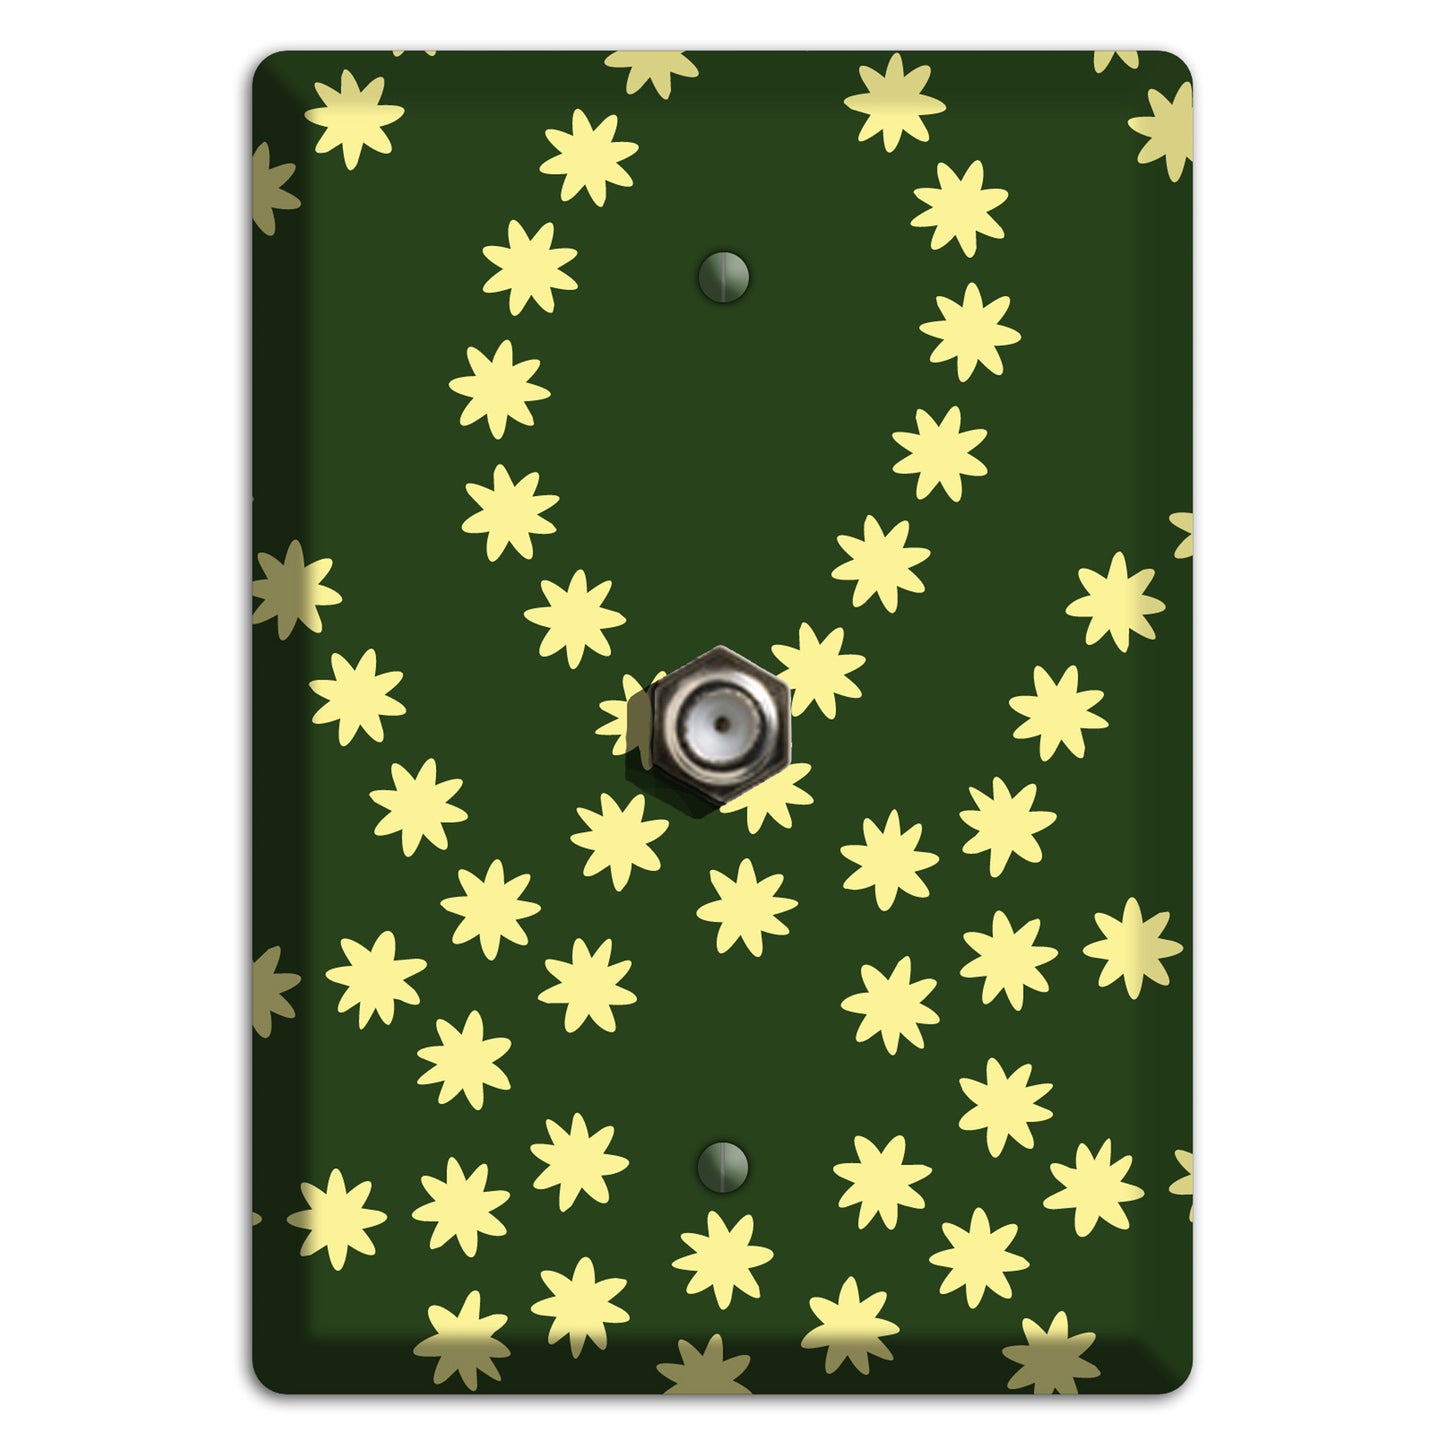 Green with Yellow Constellation Cable Wallplate